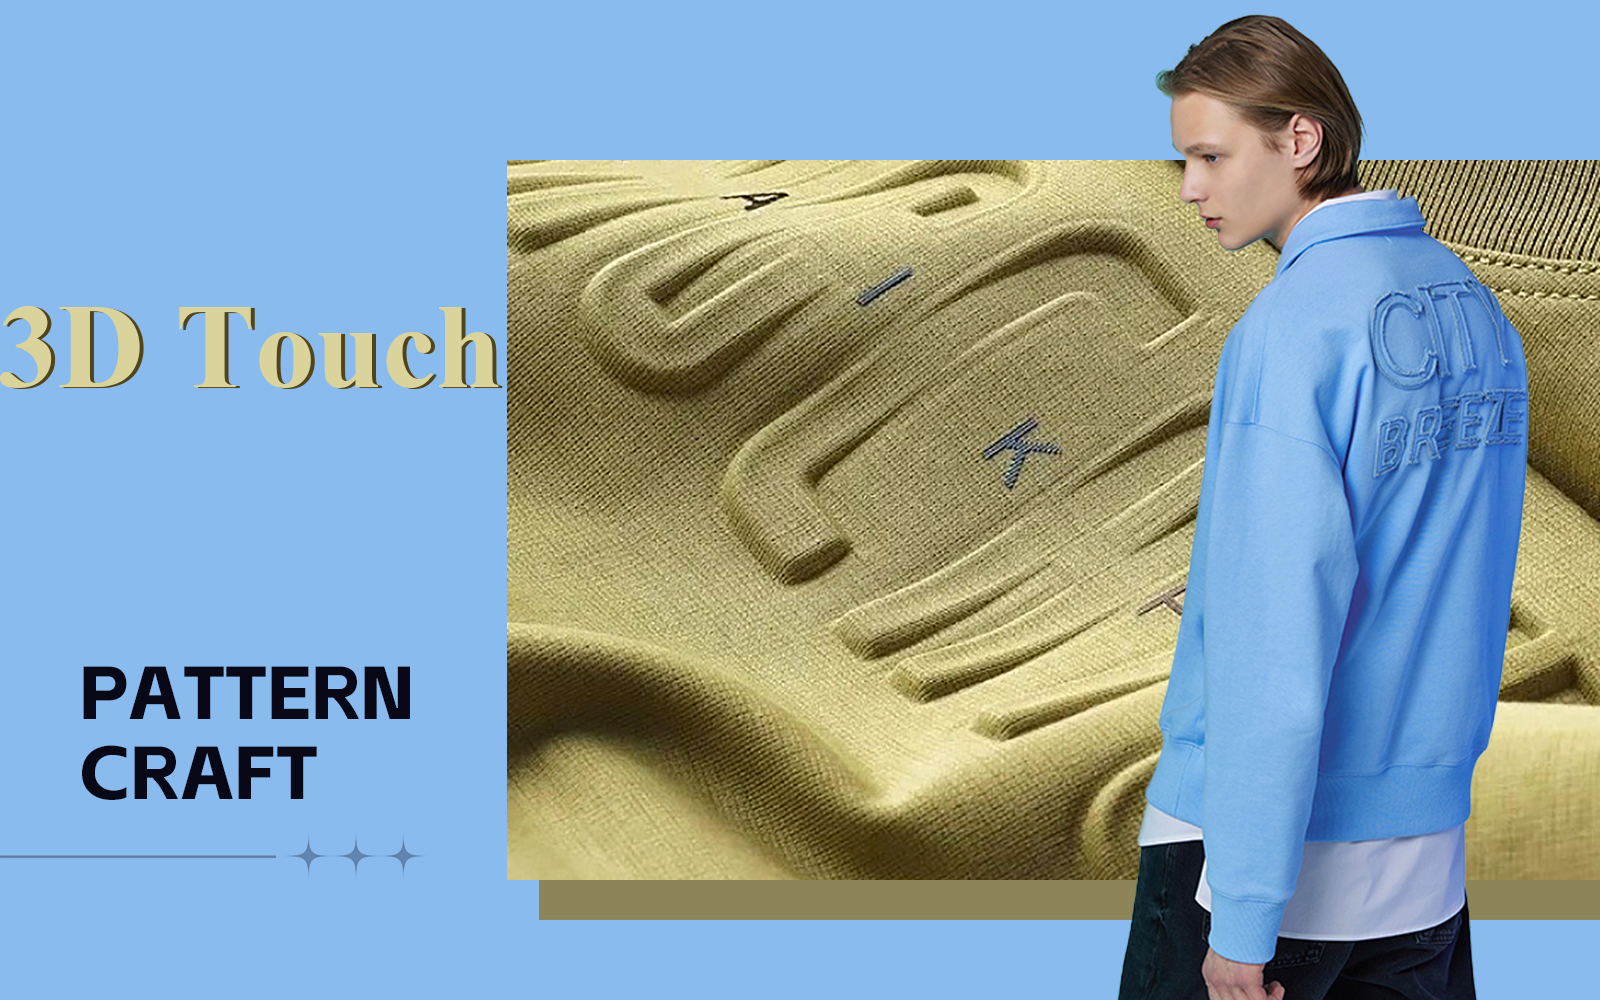 3D Touch -- The Pattern Craft Trend for Men's T-shirt & Sweatshirt